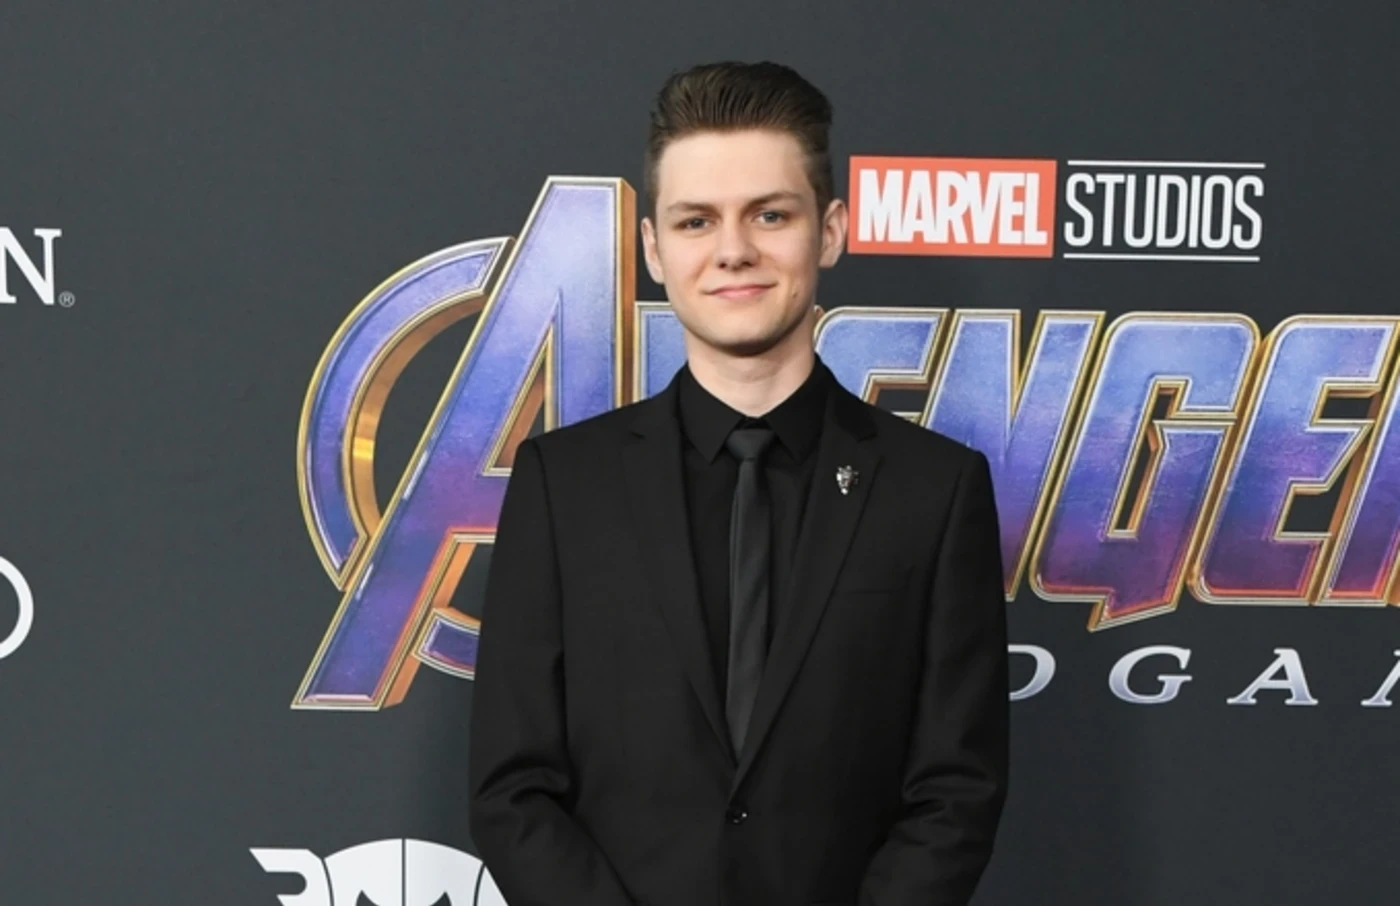 Ty Simpkins, the star who plays the role of Harvey Keener in the MCU